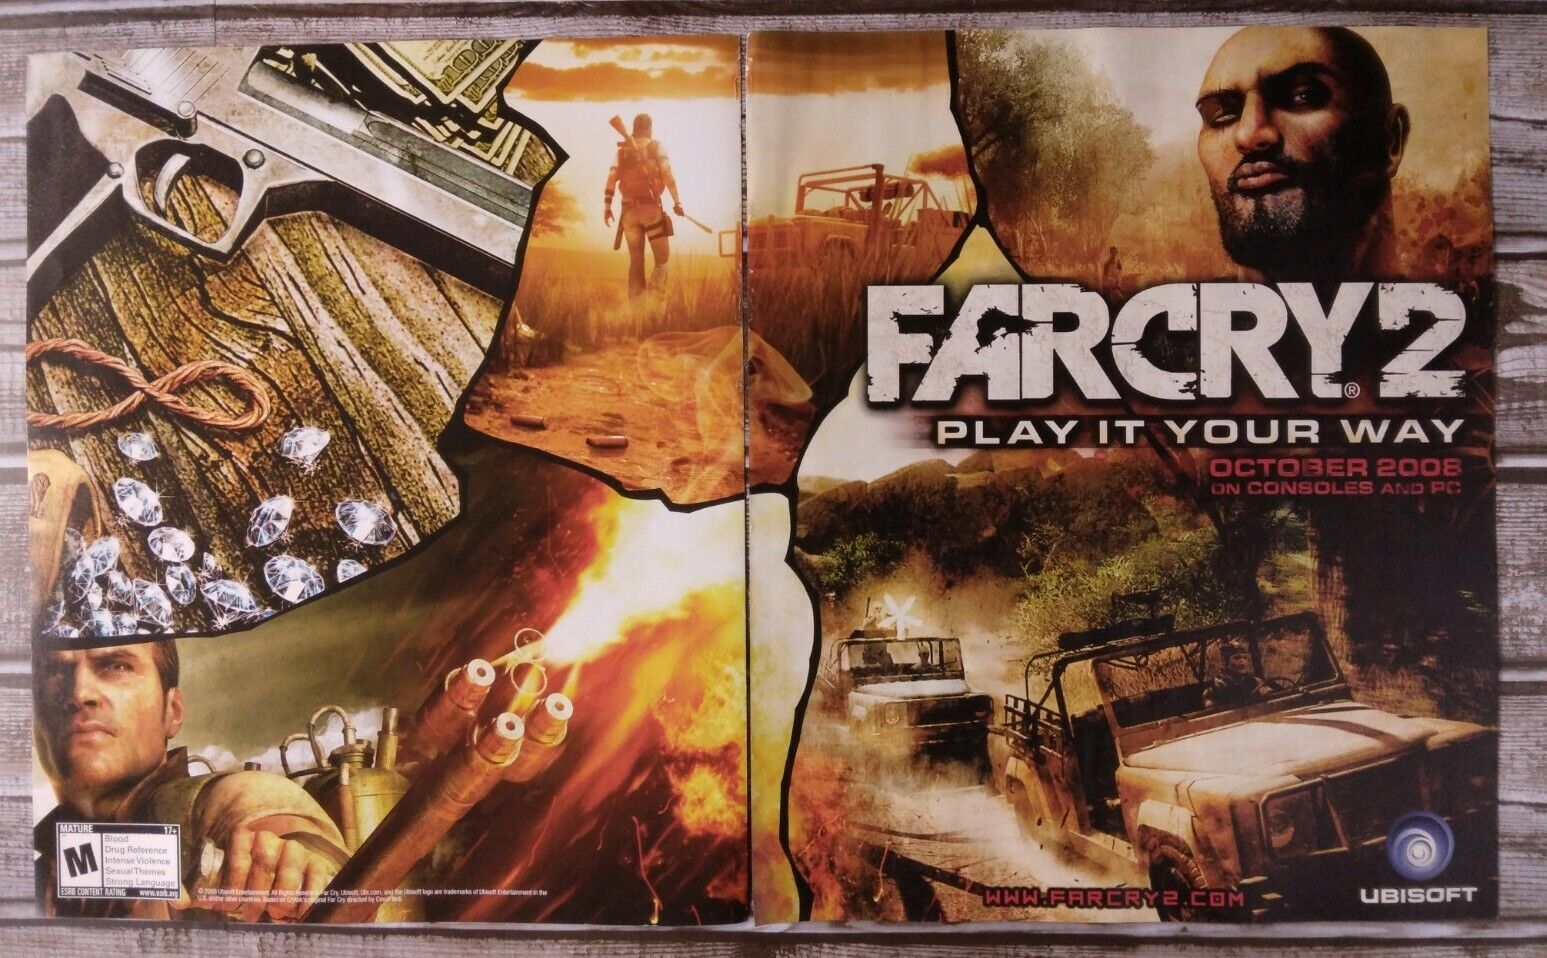 Far Cry 2 FPS Xbox 360 PS3 Promo 2008 Vintage Video Game Poster Print Ad 